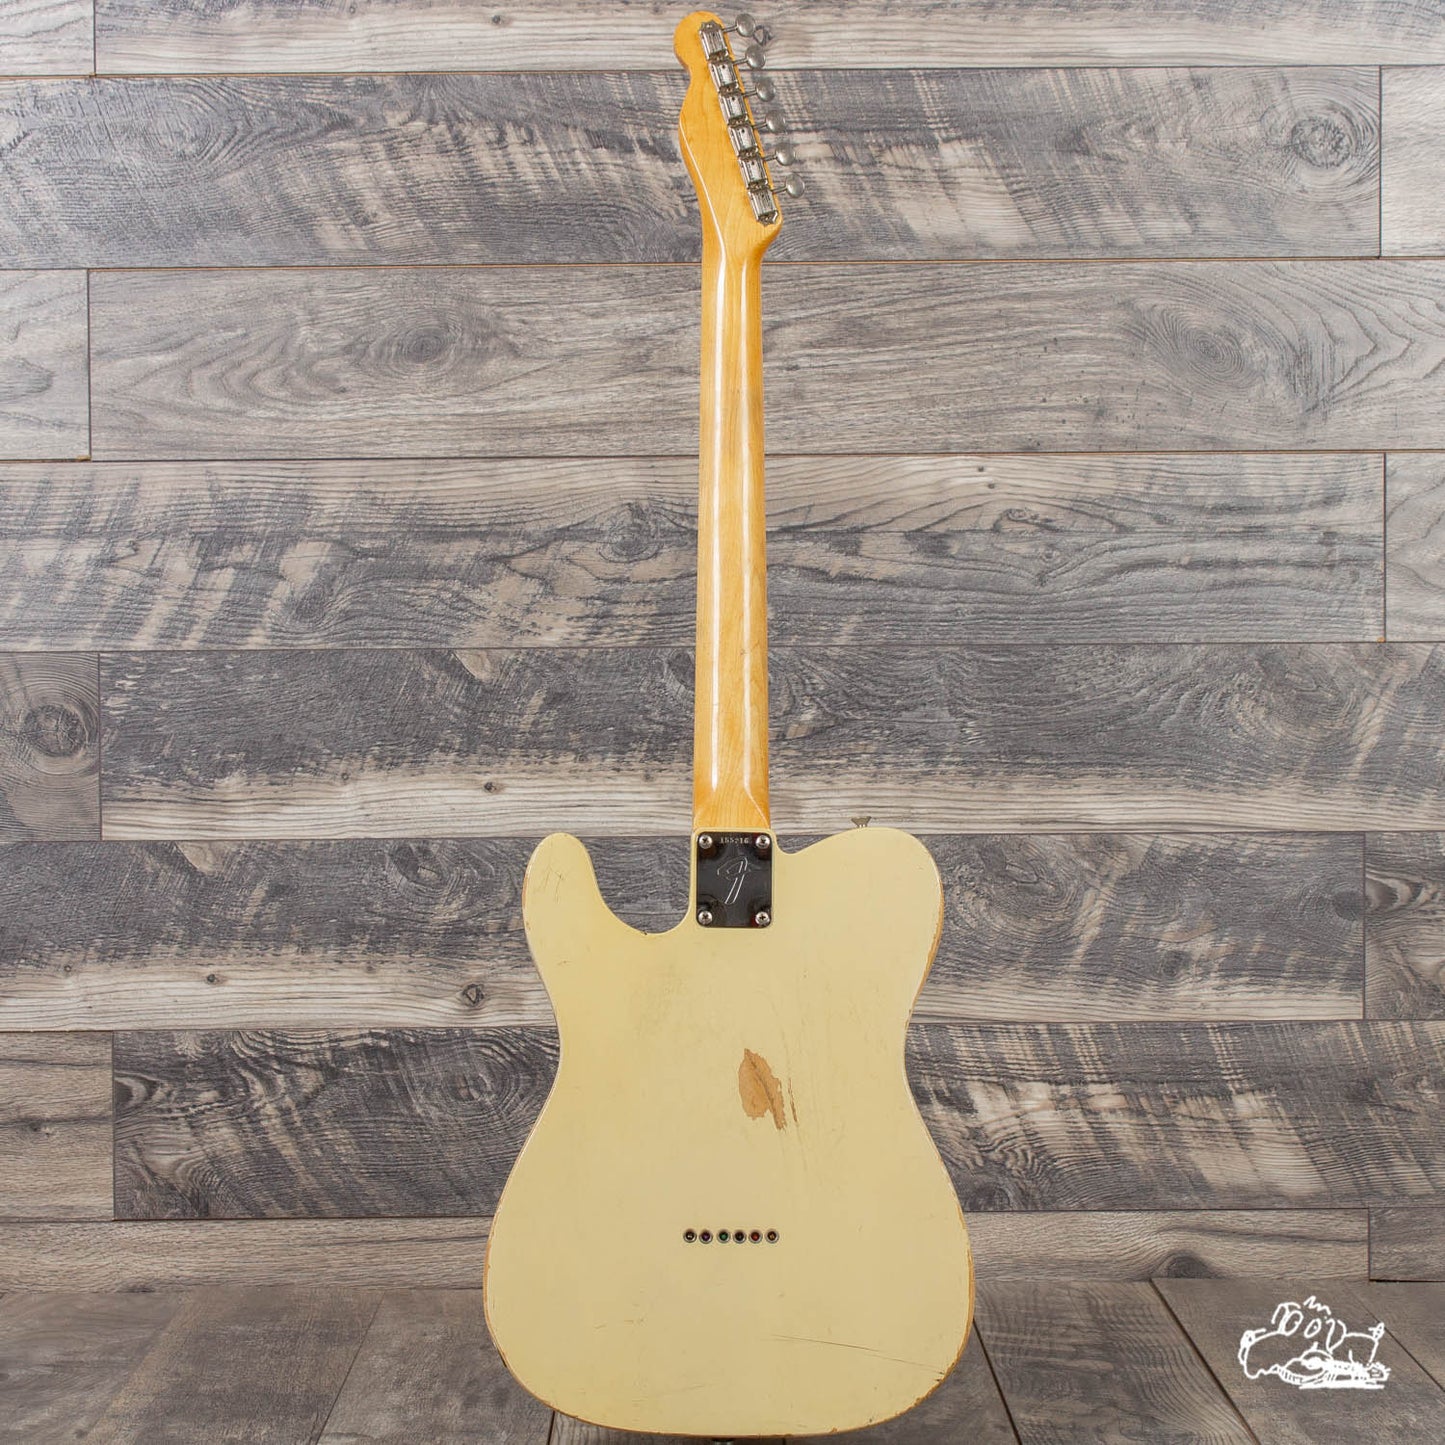 1966 Fender Telecaster - Blonde with '50s P-90